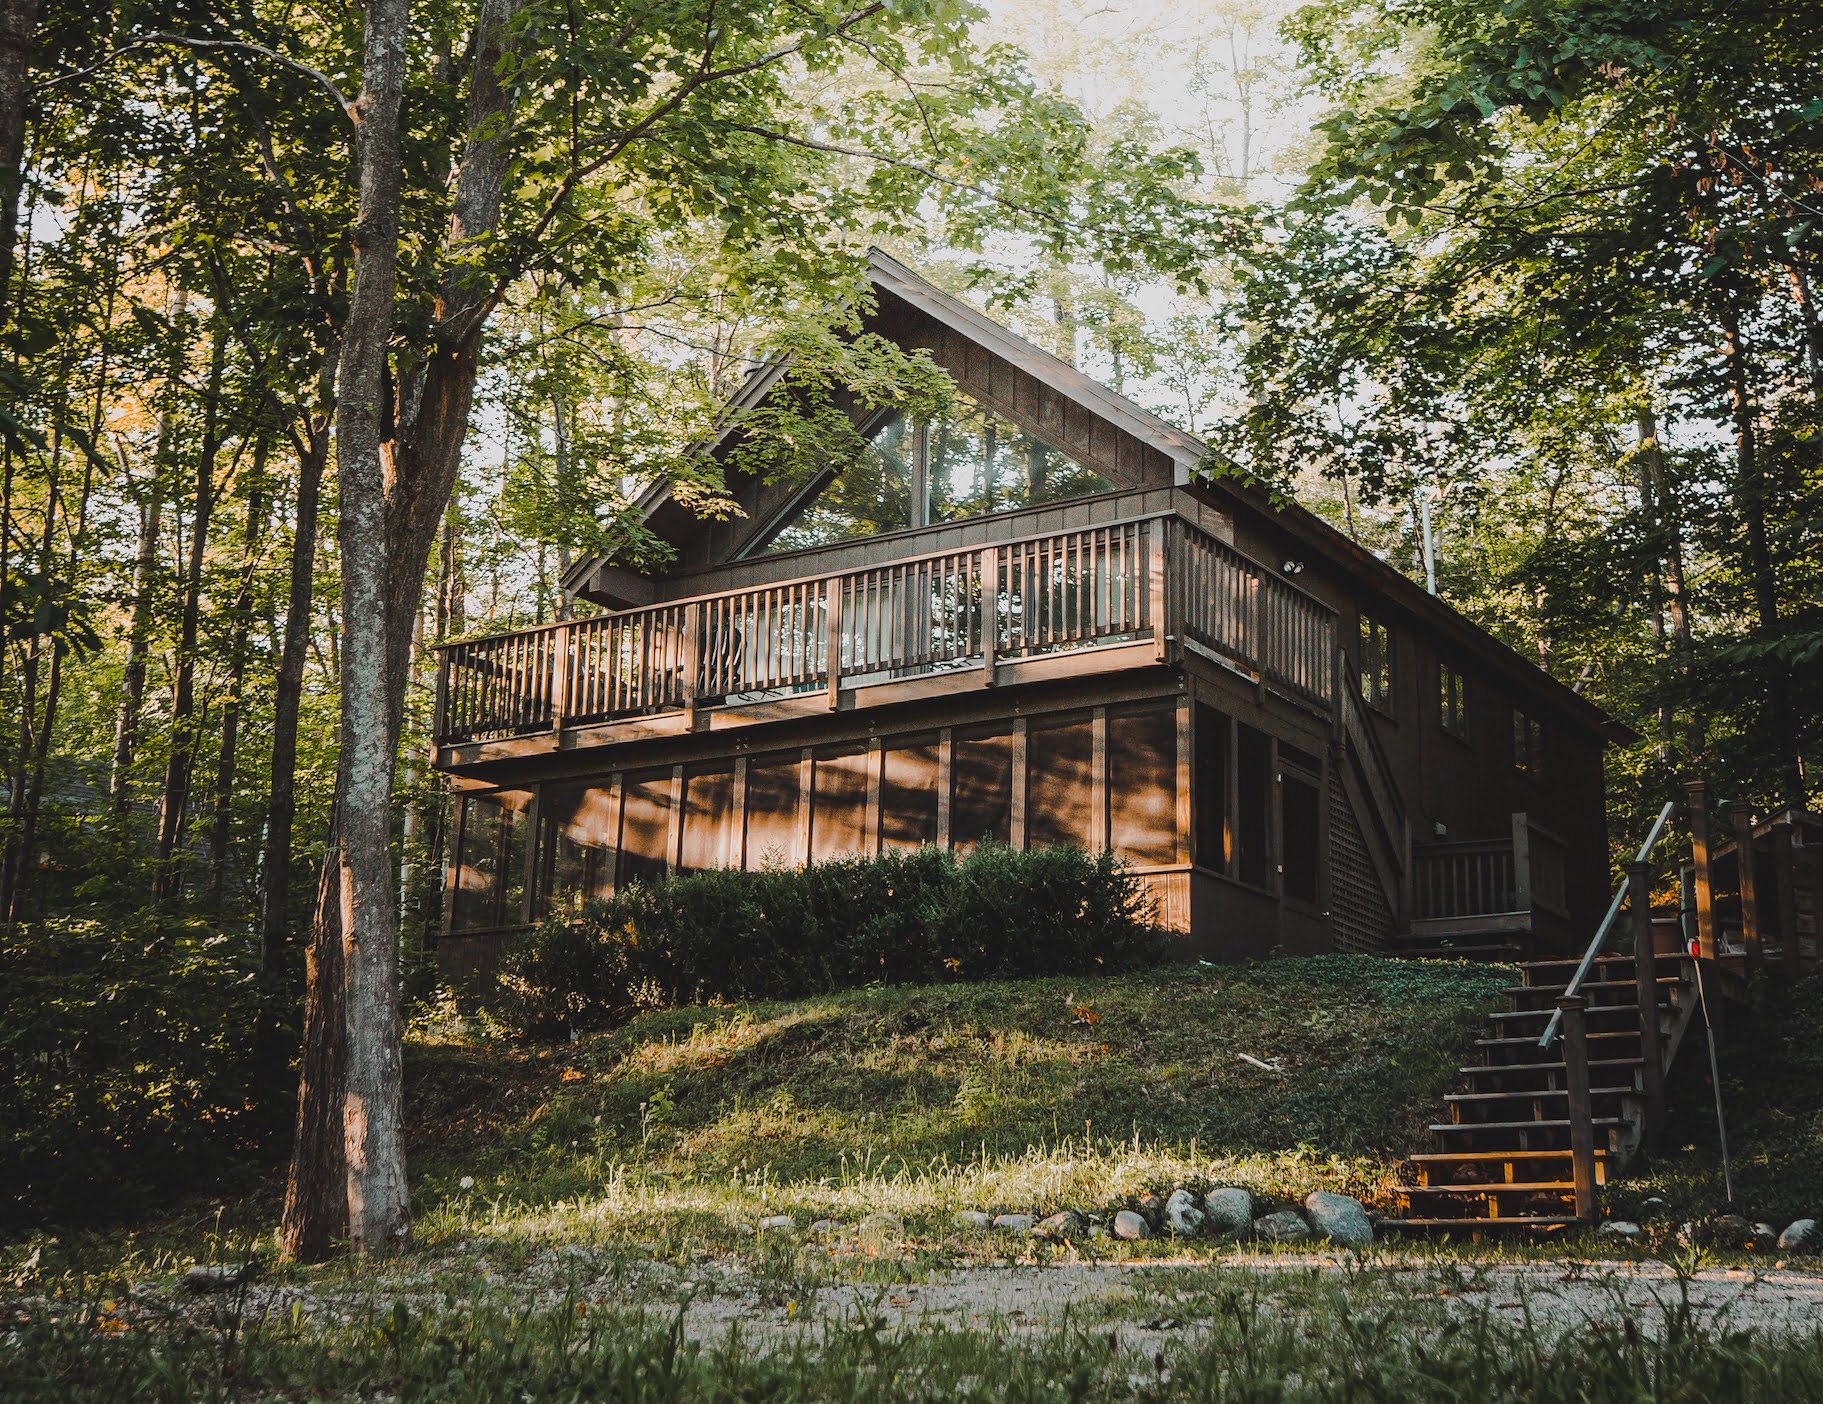 Depicts a wooden cabin in the woods. Used as a cover image for an article on Arrived Homes vs Here, which compares these two fractional real estate investing platforms for short term vacation rentals.